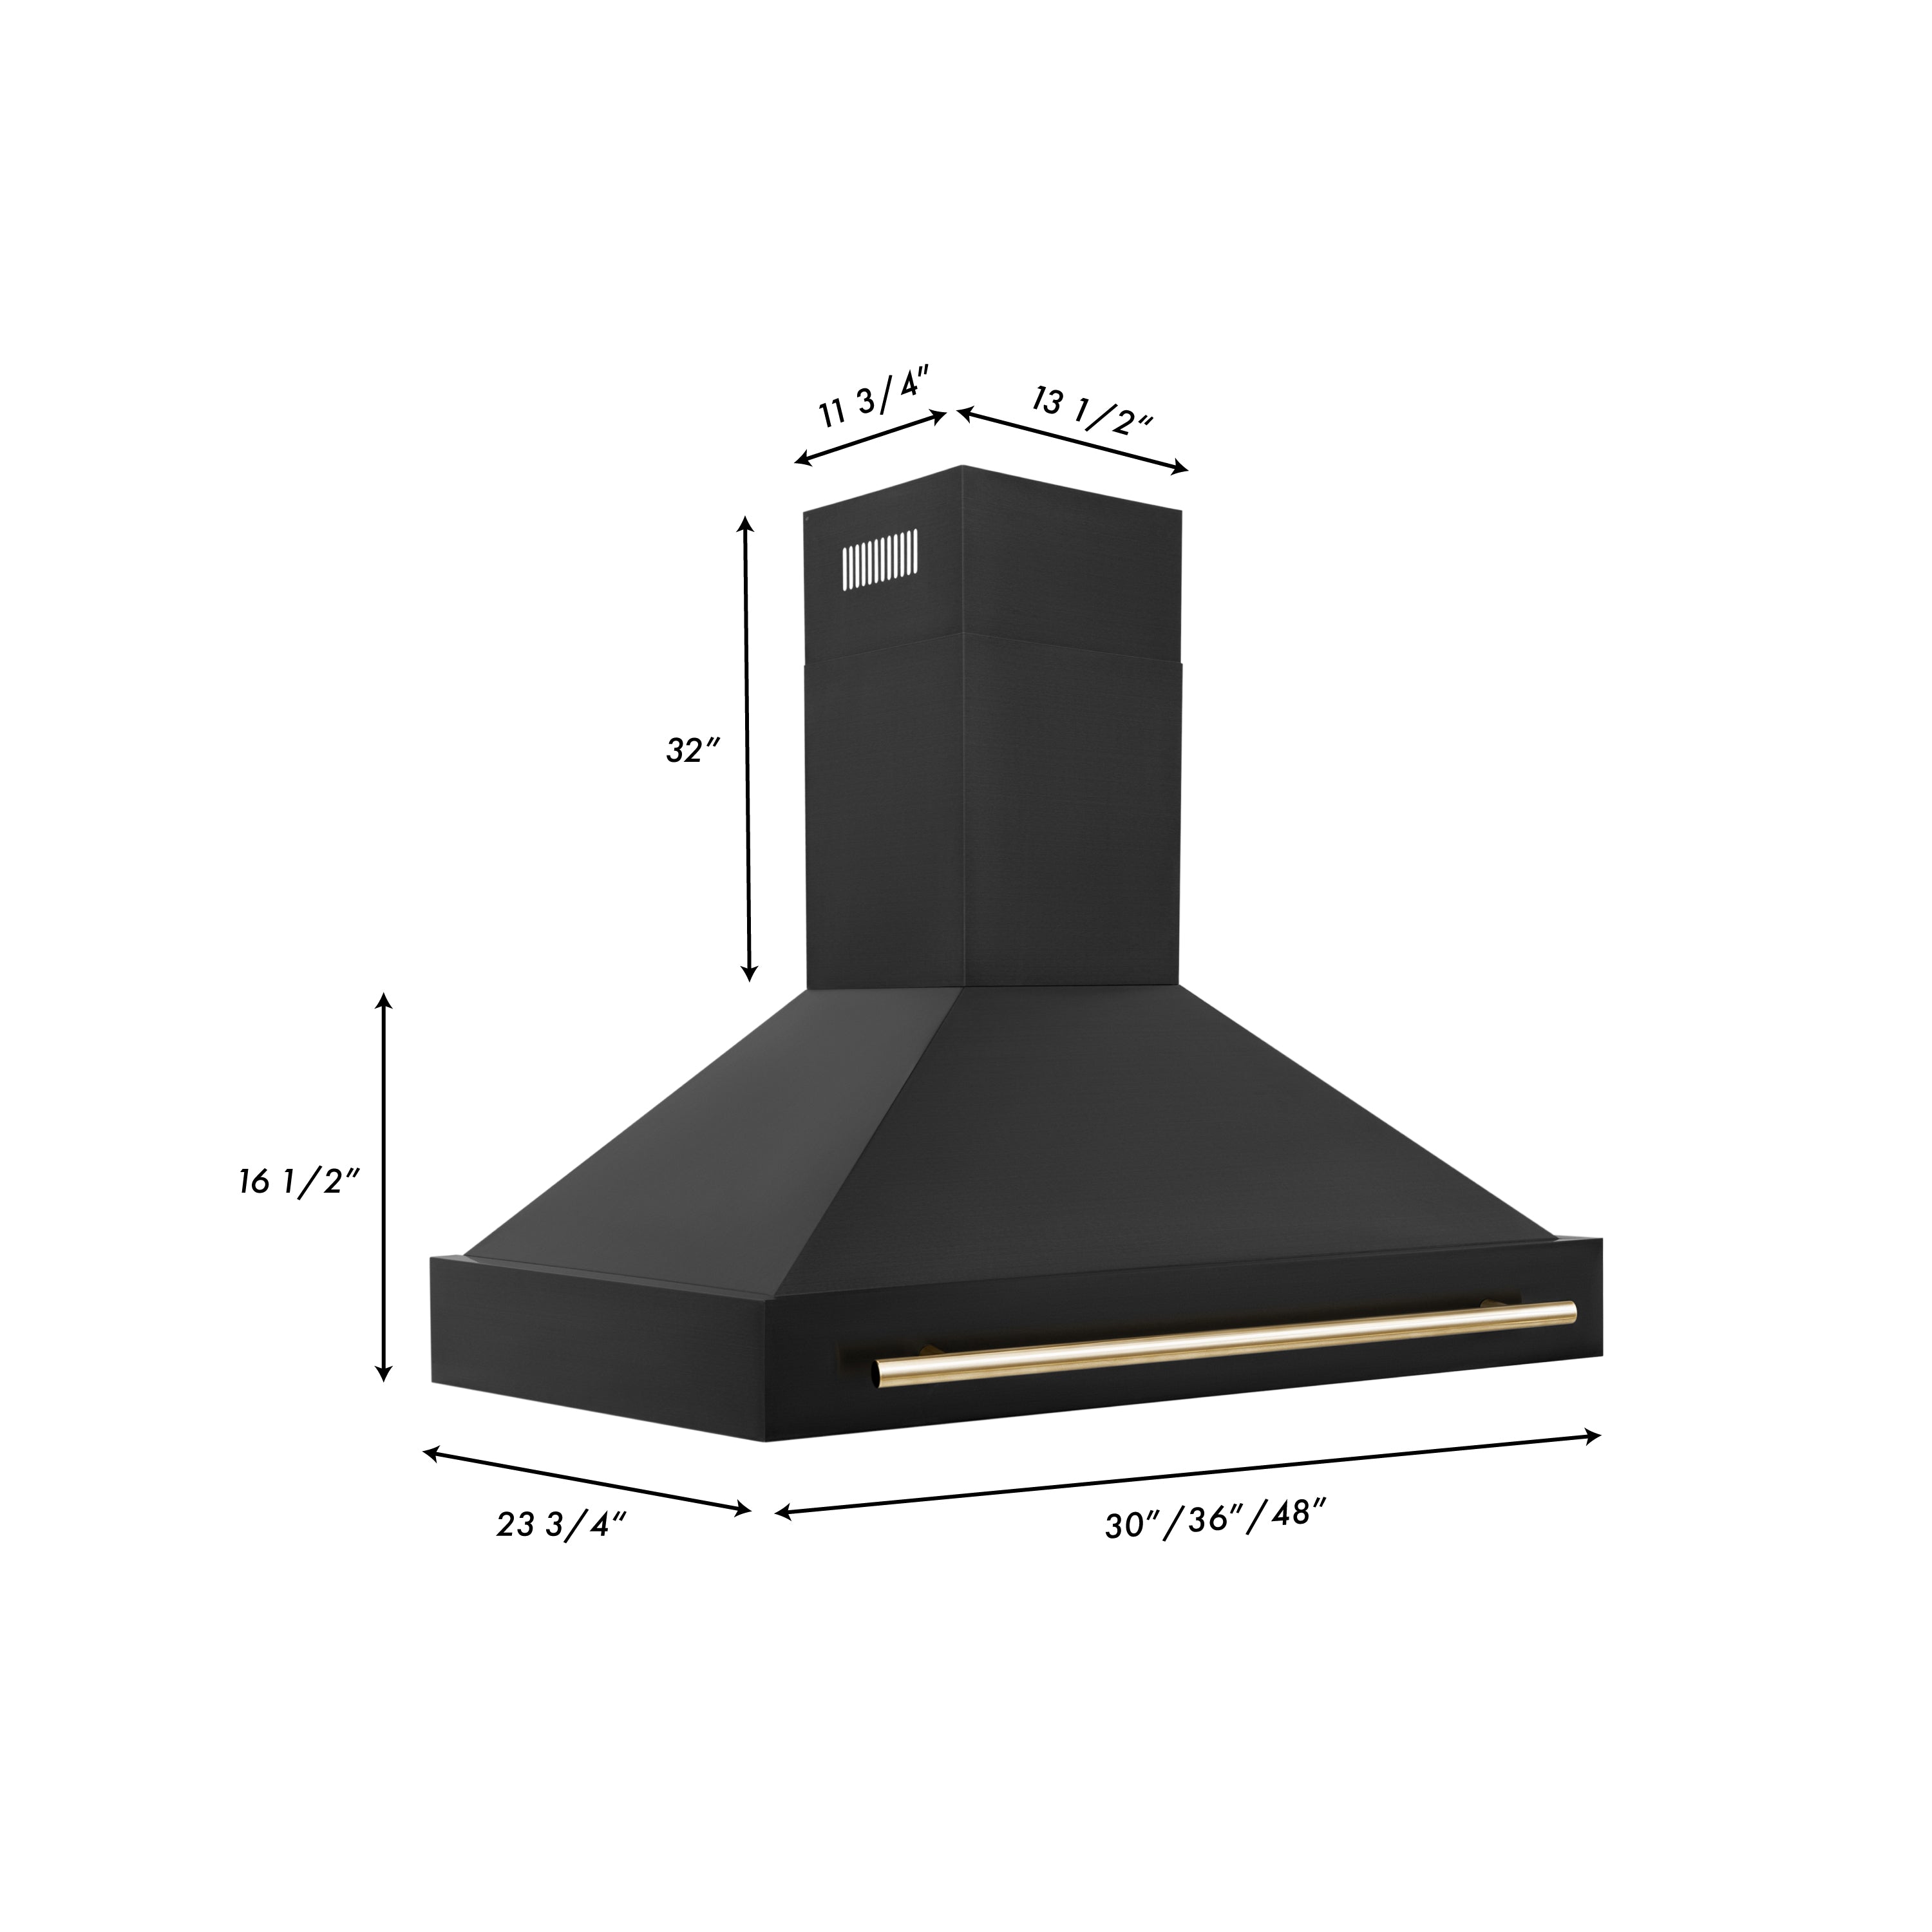 ZLINE Autograph Edition 48 in. Kitchen Package with Black Stainless Steel Dual Fuel Range and Range Hood with Polished Gold Accents (2AKP-RABRH48-G) dimensional diagram with measurements.